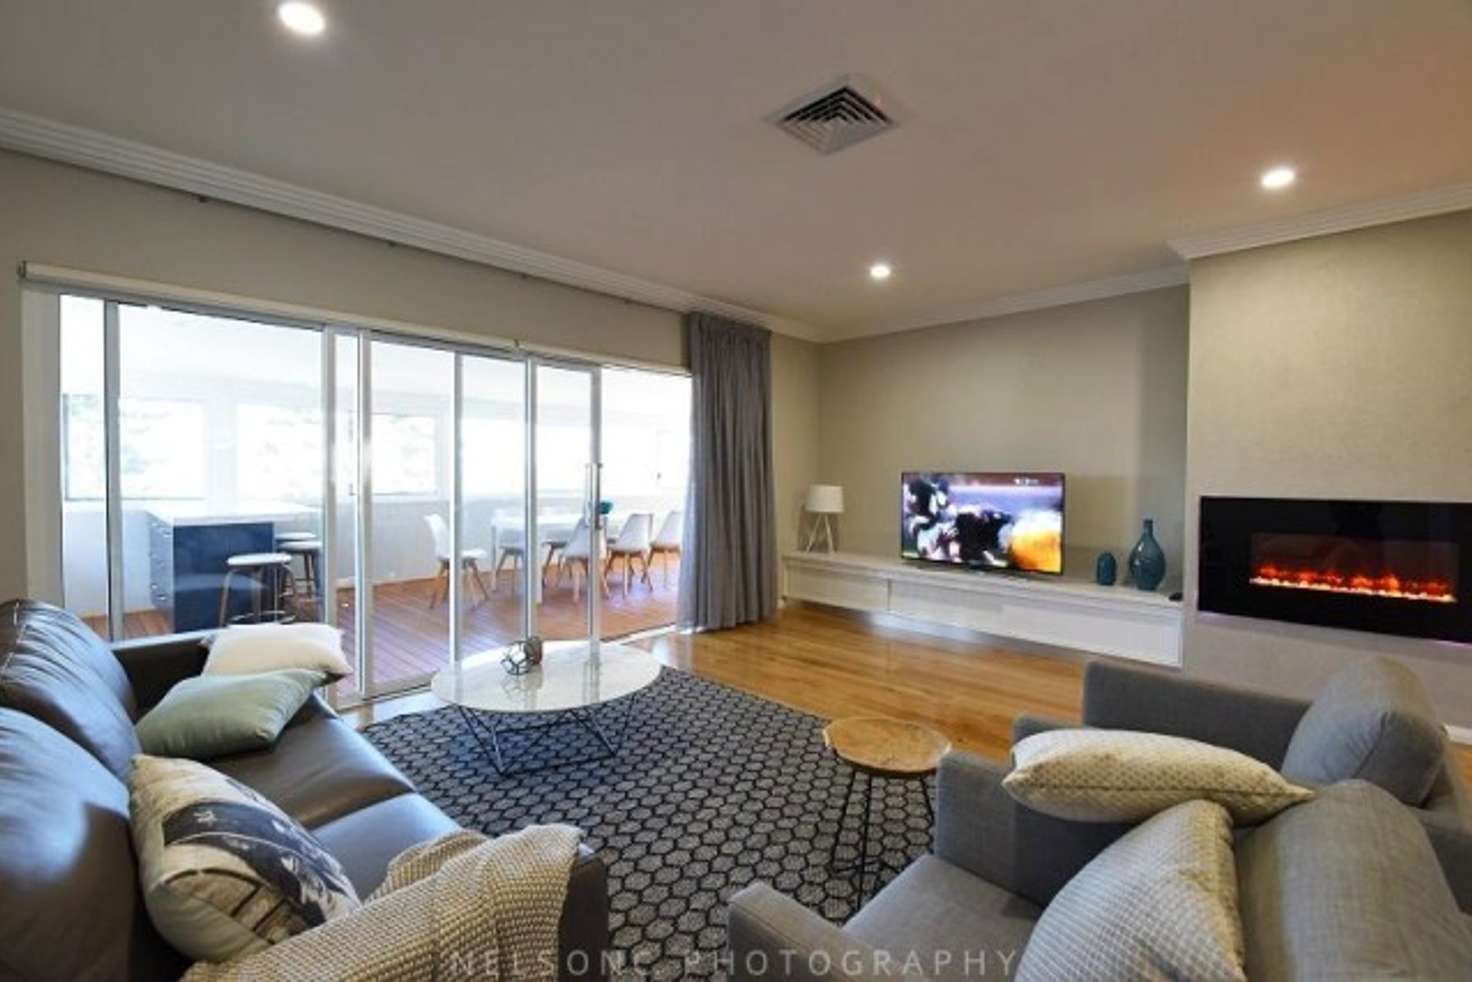 Main view of Homely apartment listing, 201/72 Marine Terrace, Fremantle WA 6160